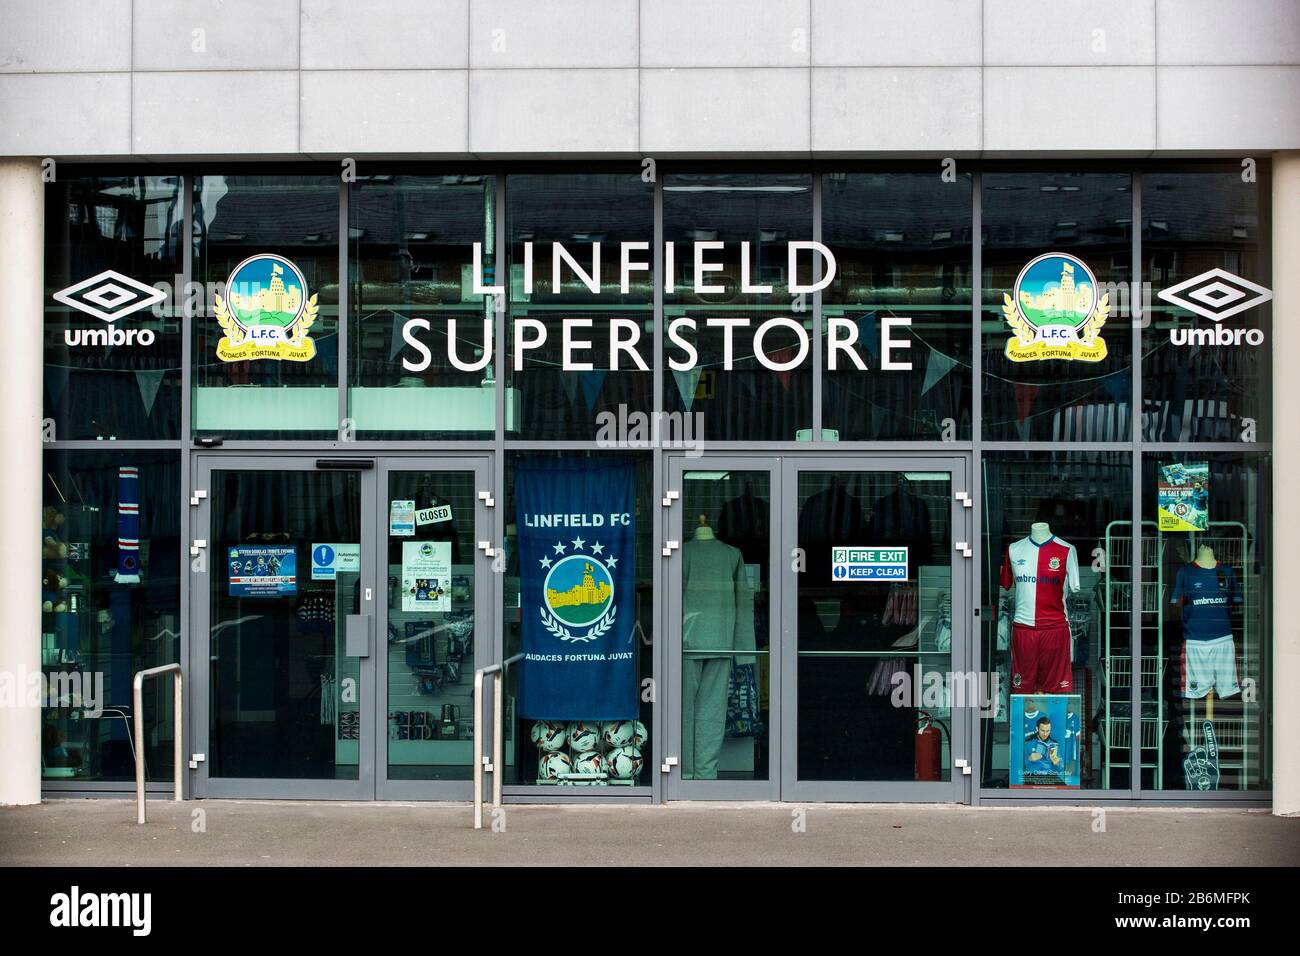 The closed Linfield FC superstore at the National Football Stadium at Windsor Park in Belfast. The stadium, which is the home of Linfield FC and Northern Ireland's national football team, has closed its offices and superstore for a deep clean after a Linfield player contracted Coronavirus. Stock Photo